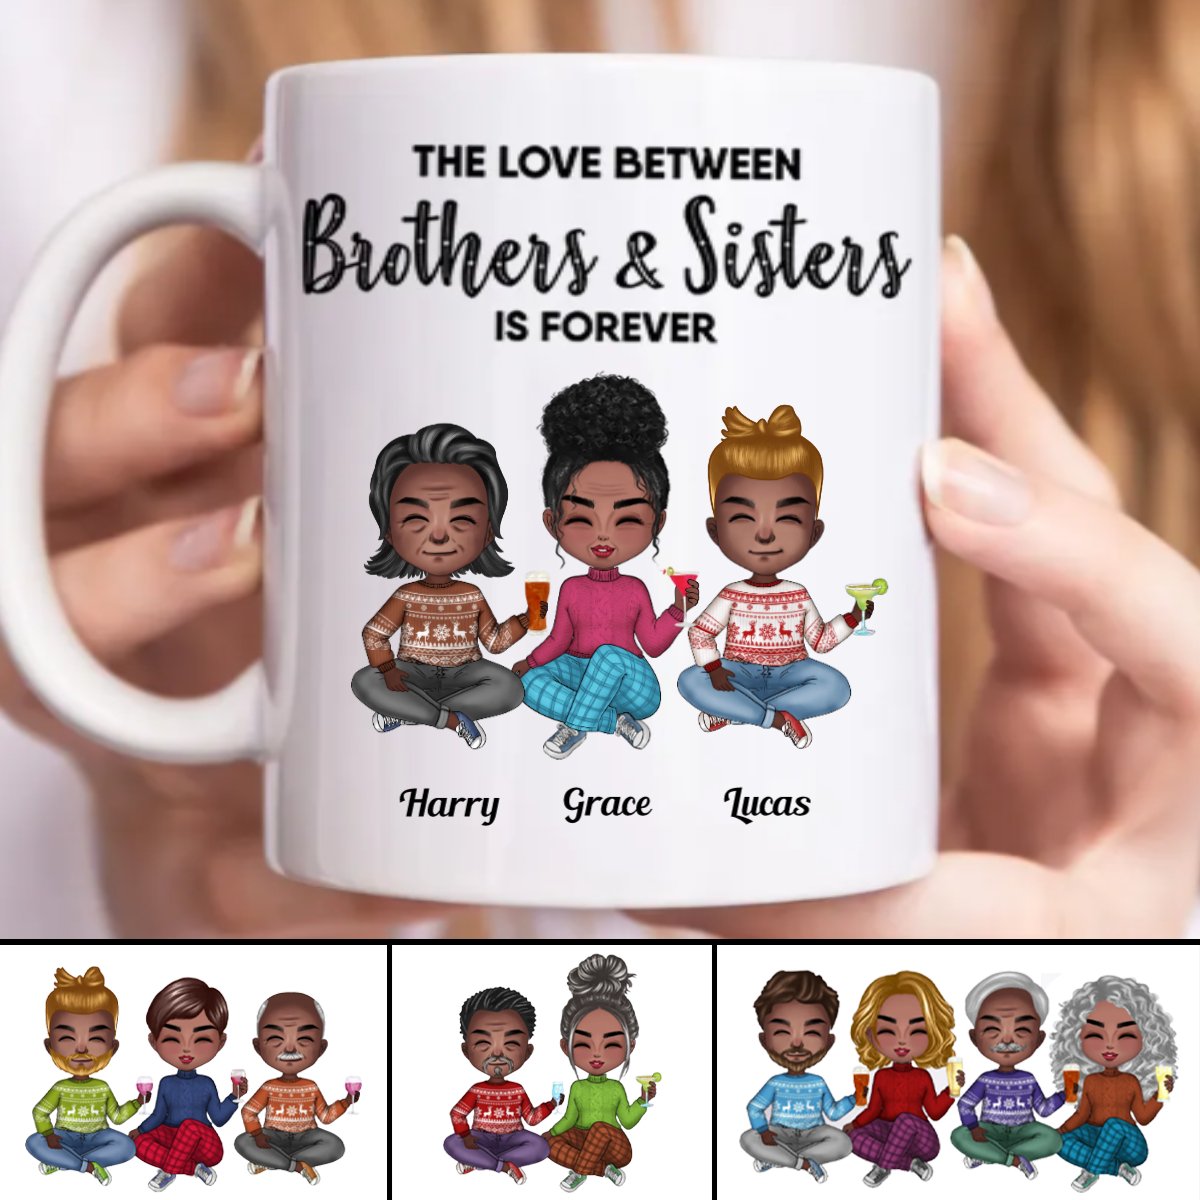 The Love Between Brothers & Sisters Is Forever - Personalized Mug - The Next Custom Gift